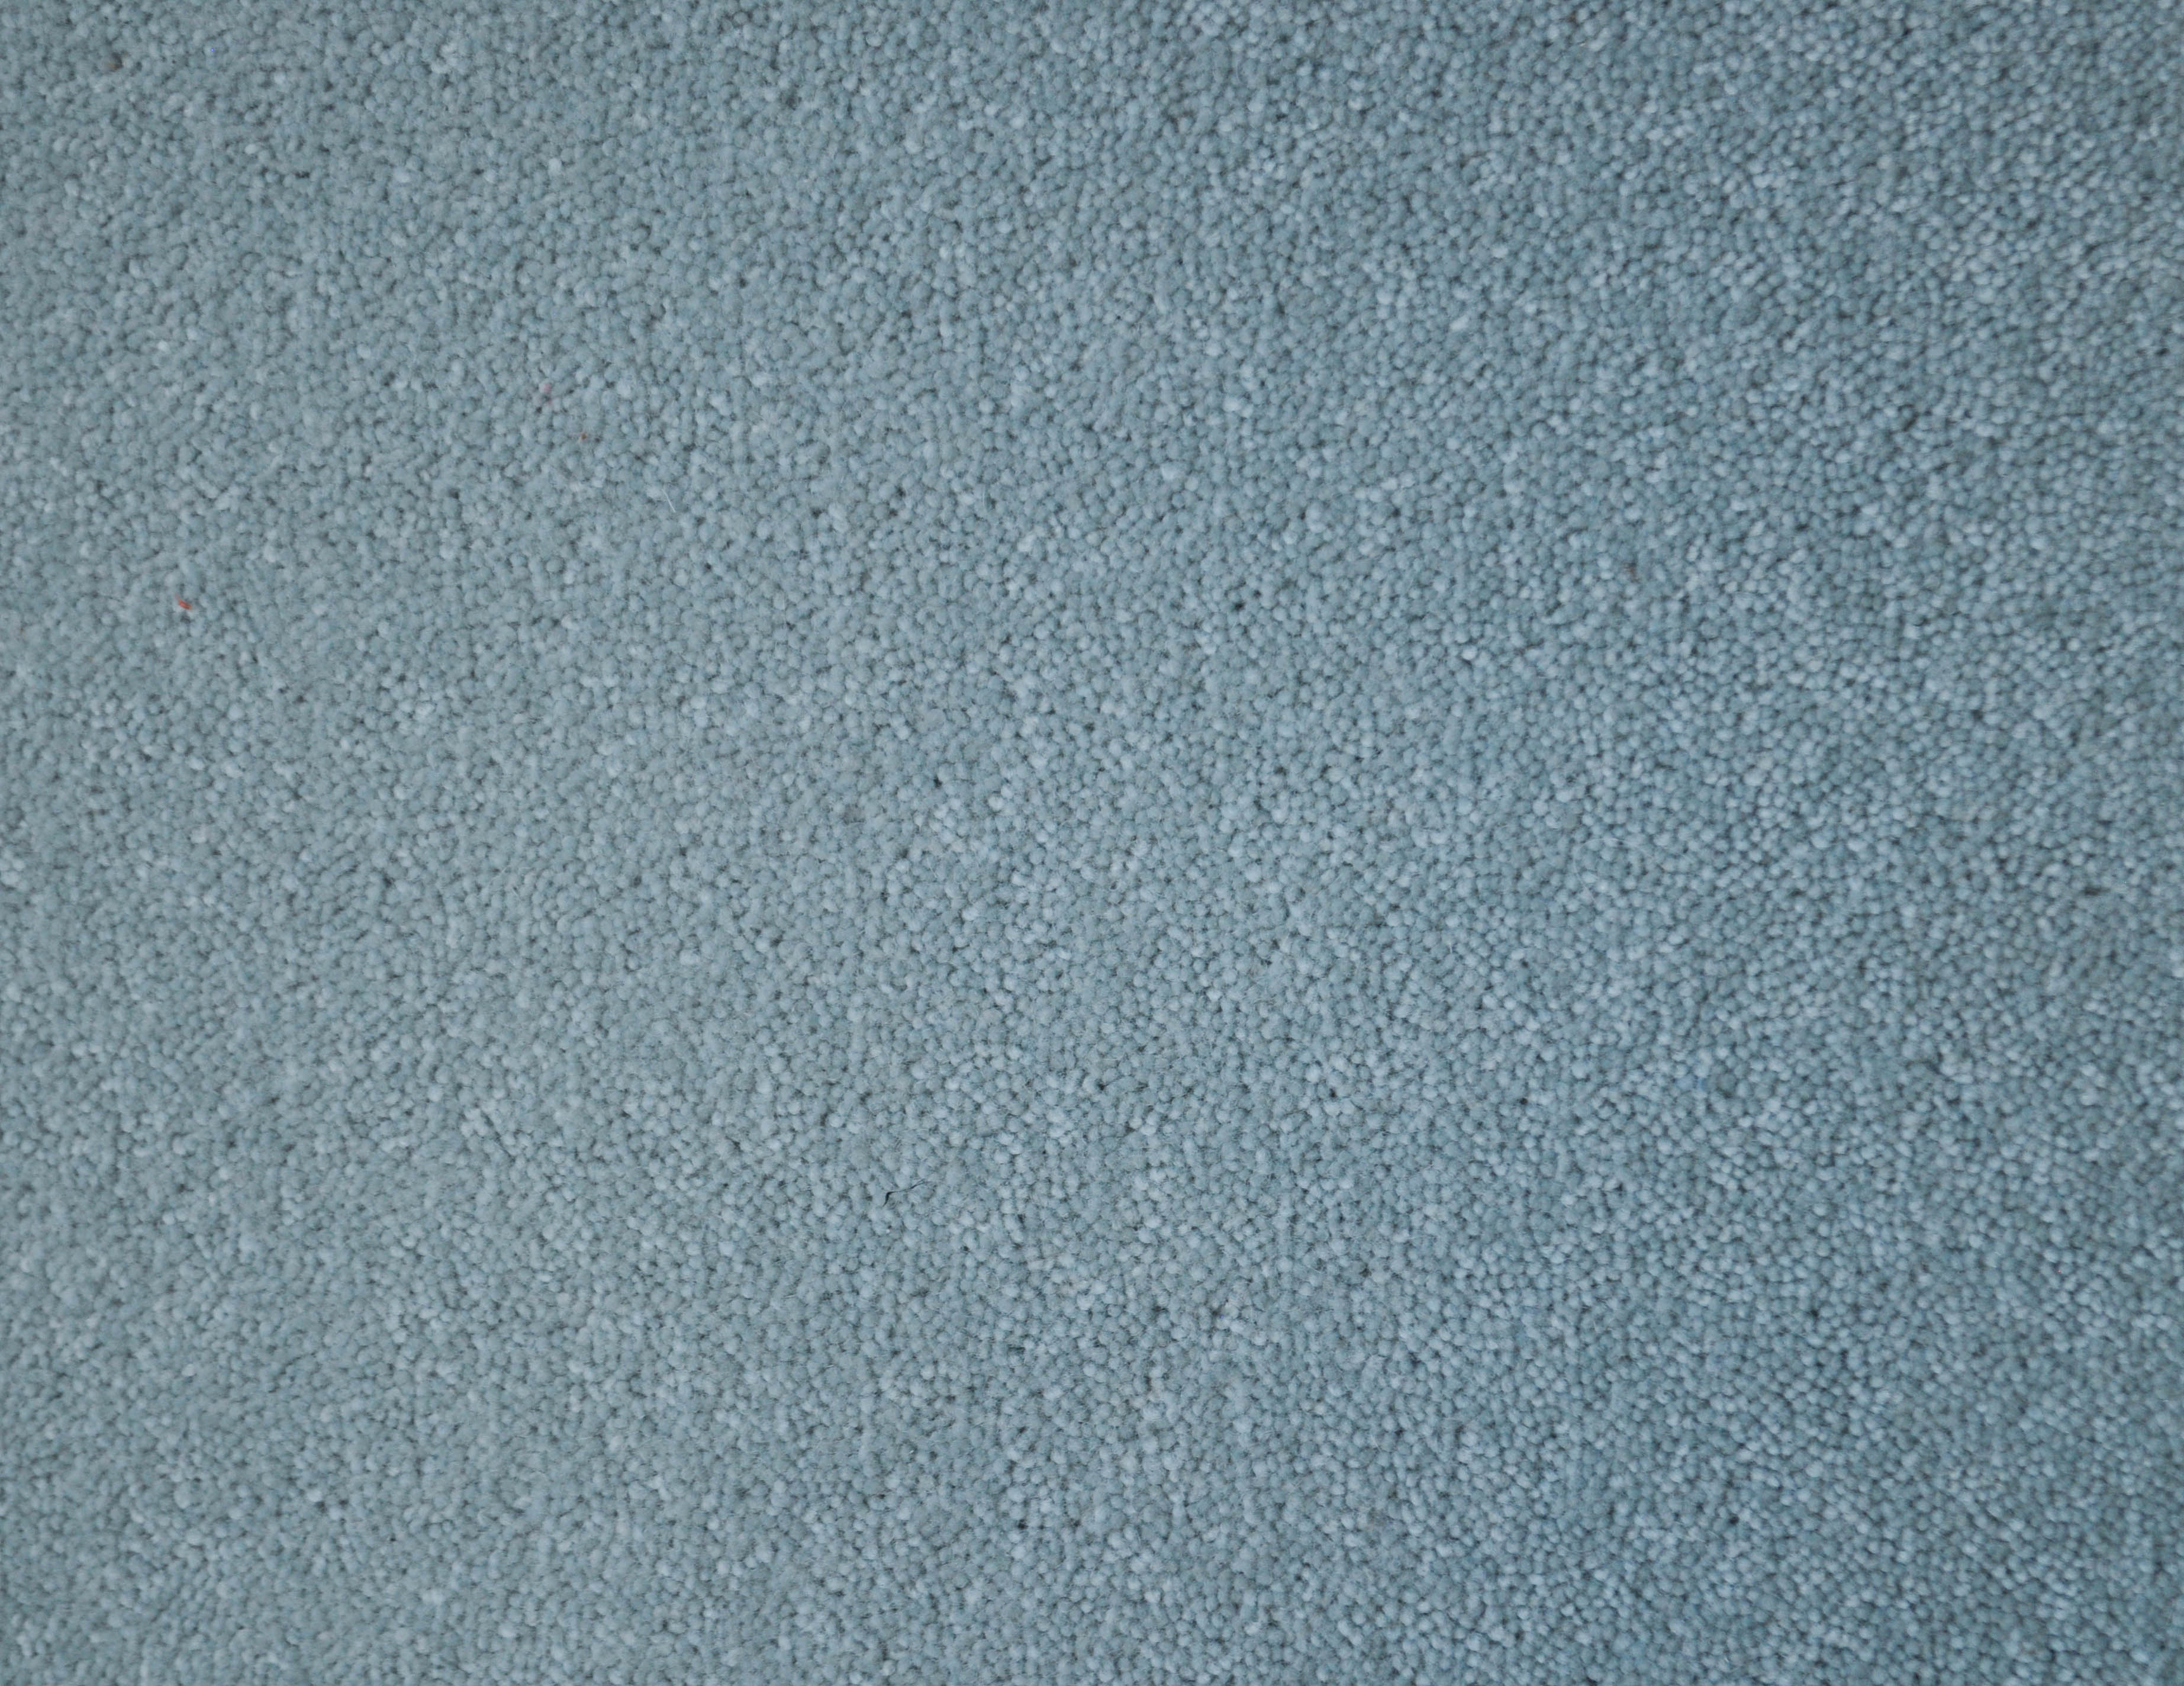 carpet range: ANDEAN HEIGHTS color: lily, wool fibre, twist, light green color, on sale at Concord Floors.